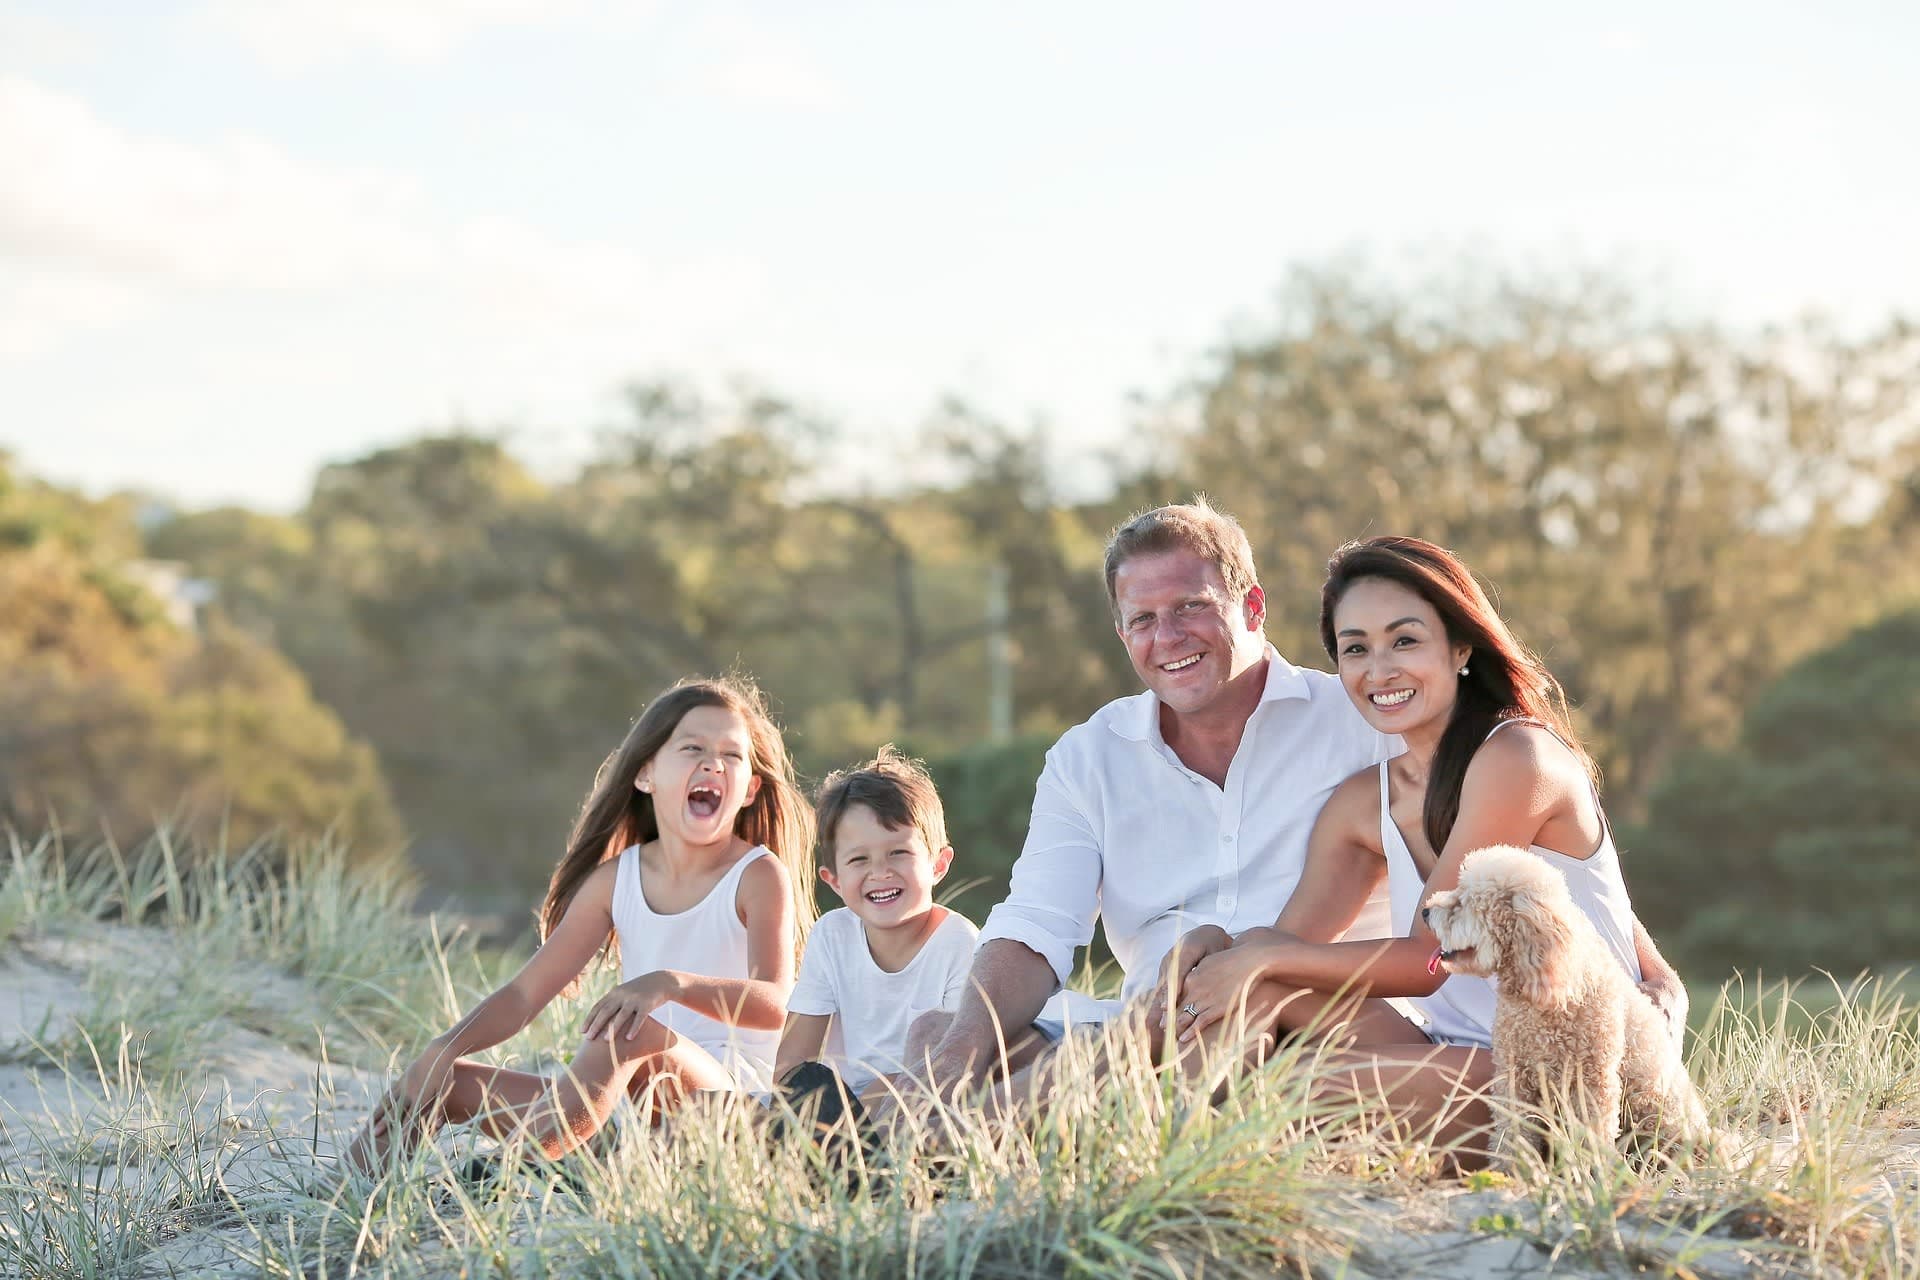 What to Wear & What to Avoid for your Family Portrait Session